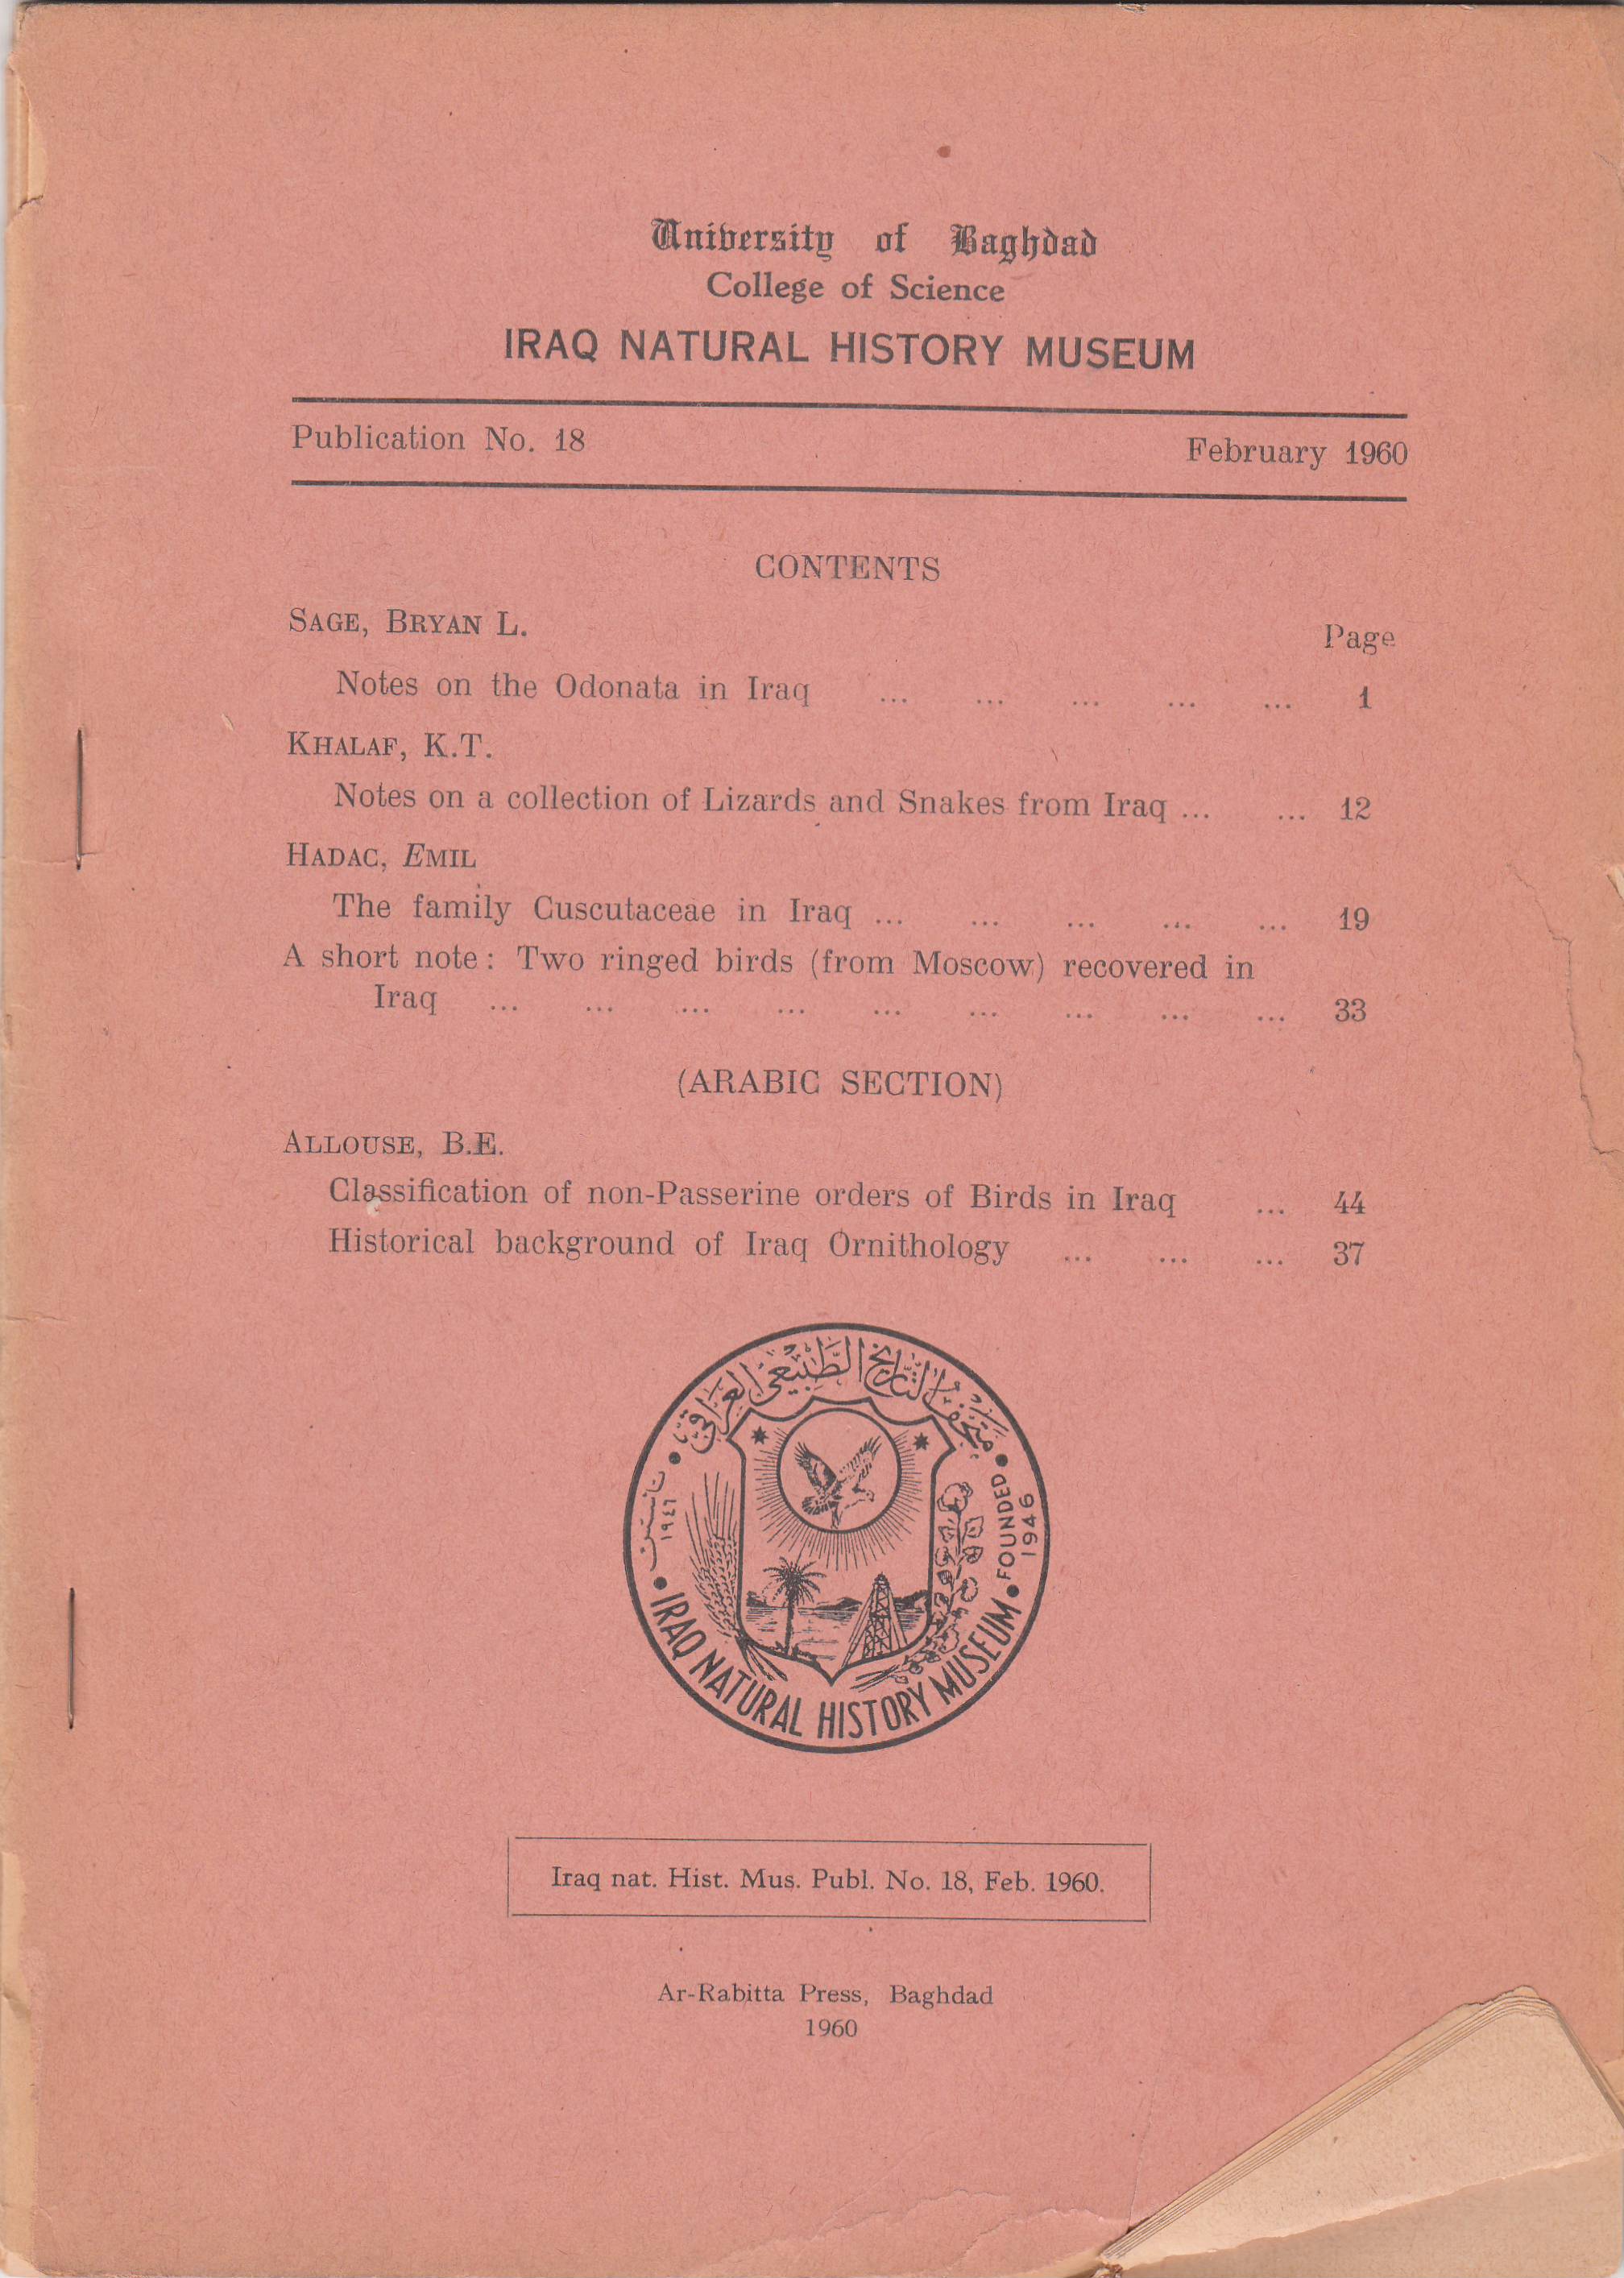 					View No. 18 (1960):  Historical background of Iraq Ornithology  (ARABIC SECTION) by LOUSE, B.E.   p;37
				